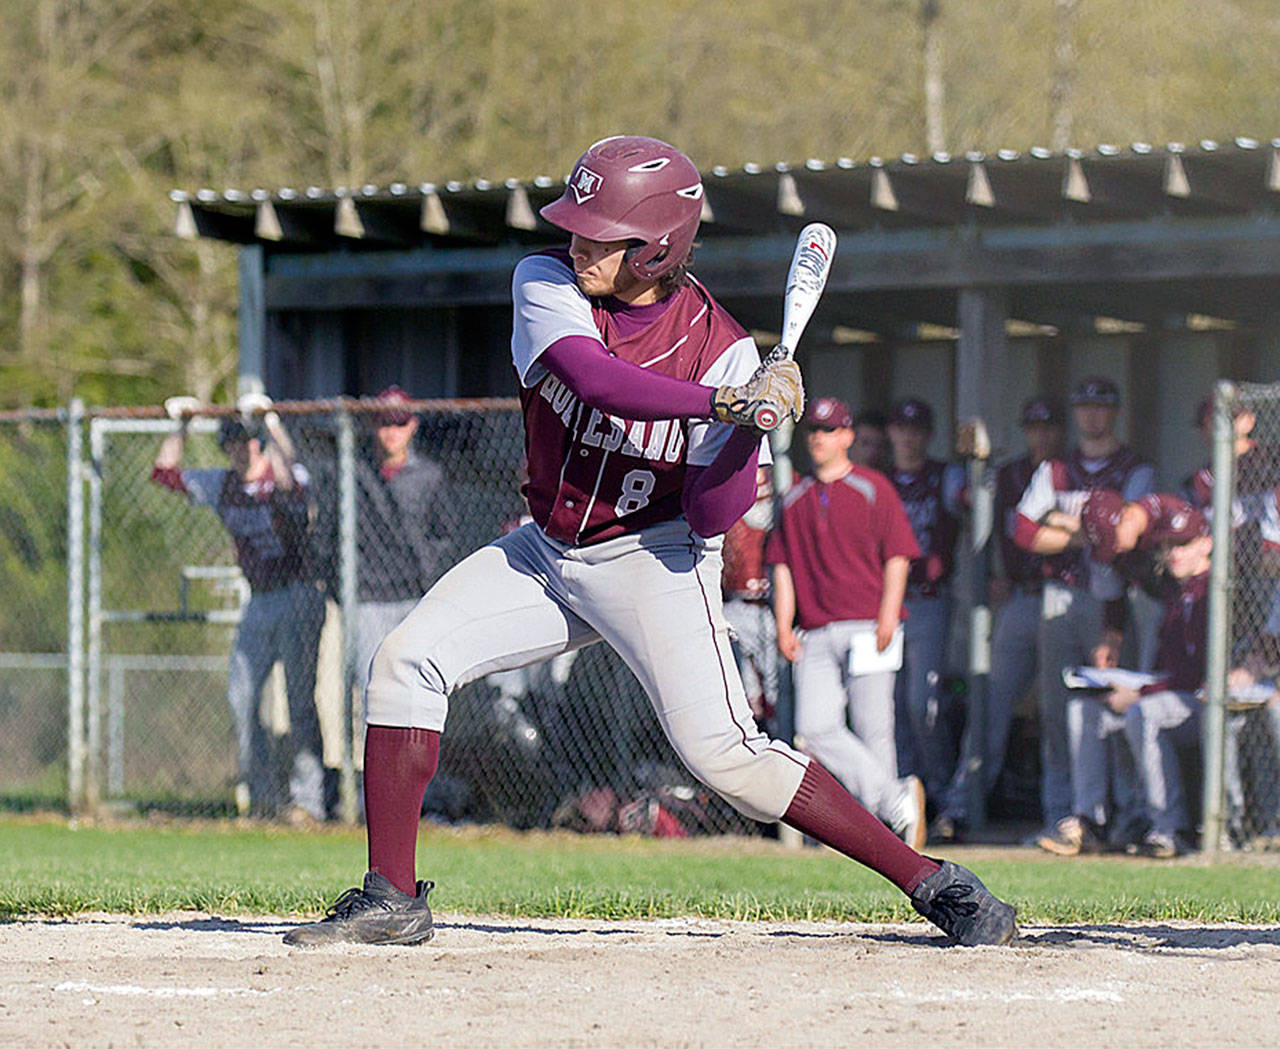 Montesano’s speedy outfielder Teegan Zillyett returns for a Montesano team that won 20 games and advanced to the state tournament last season. (Photo by Shawn Donnelly)